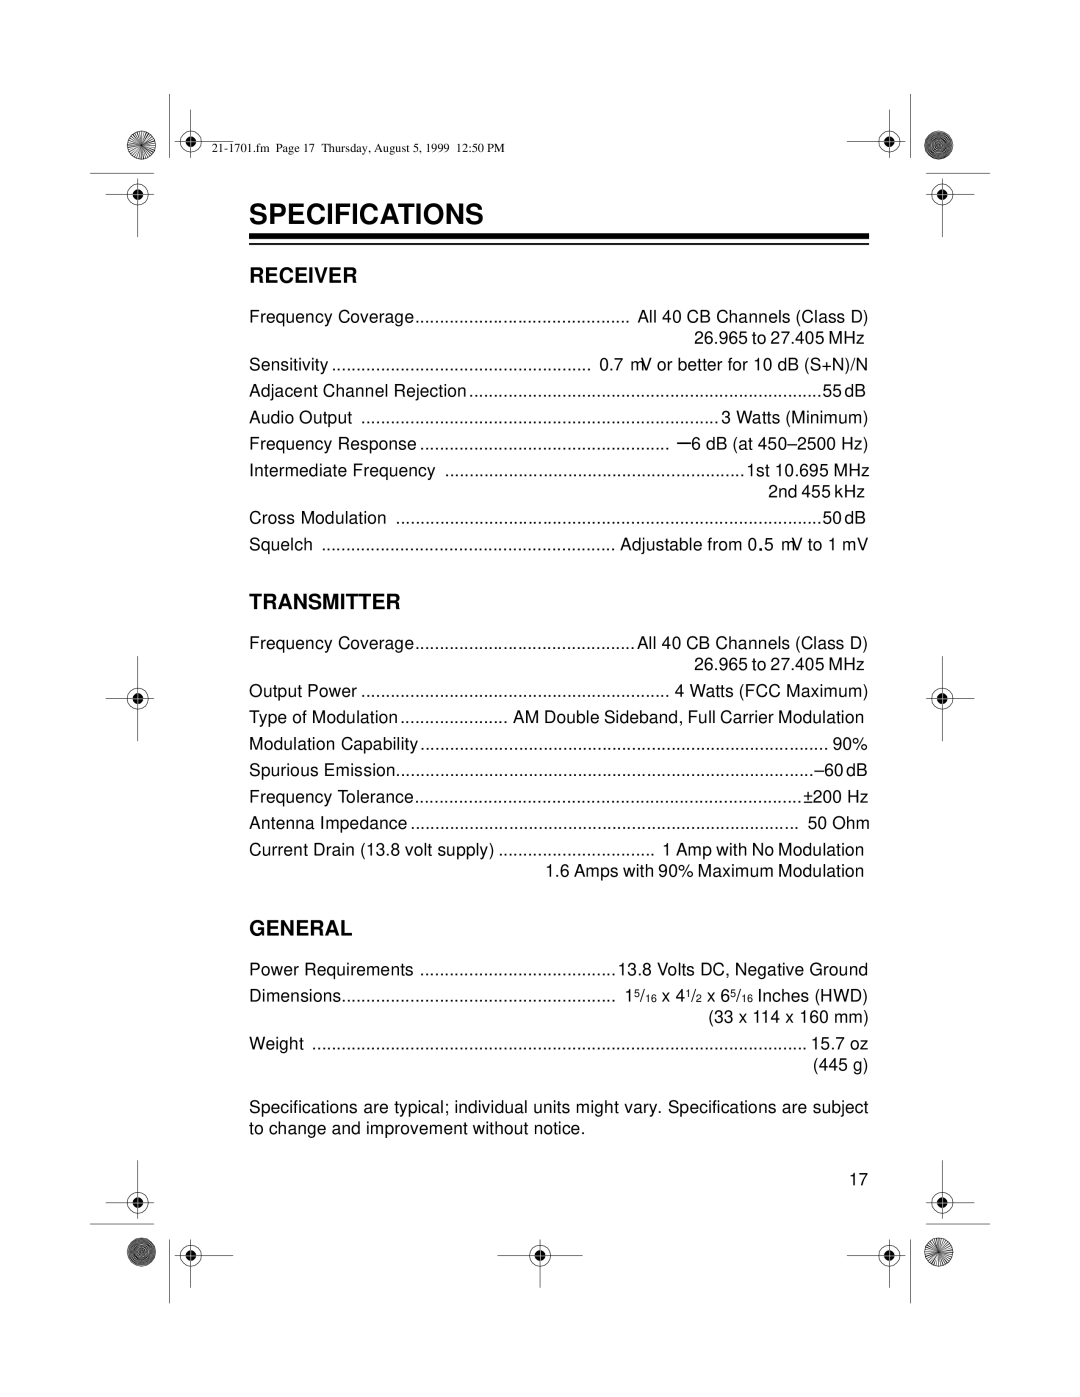 Radio Shack TRC-501 owner manual Specifications, Receiver 